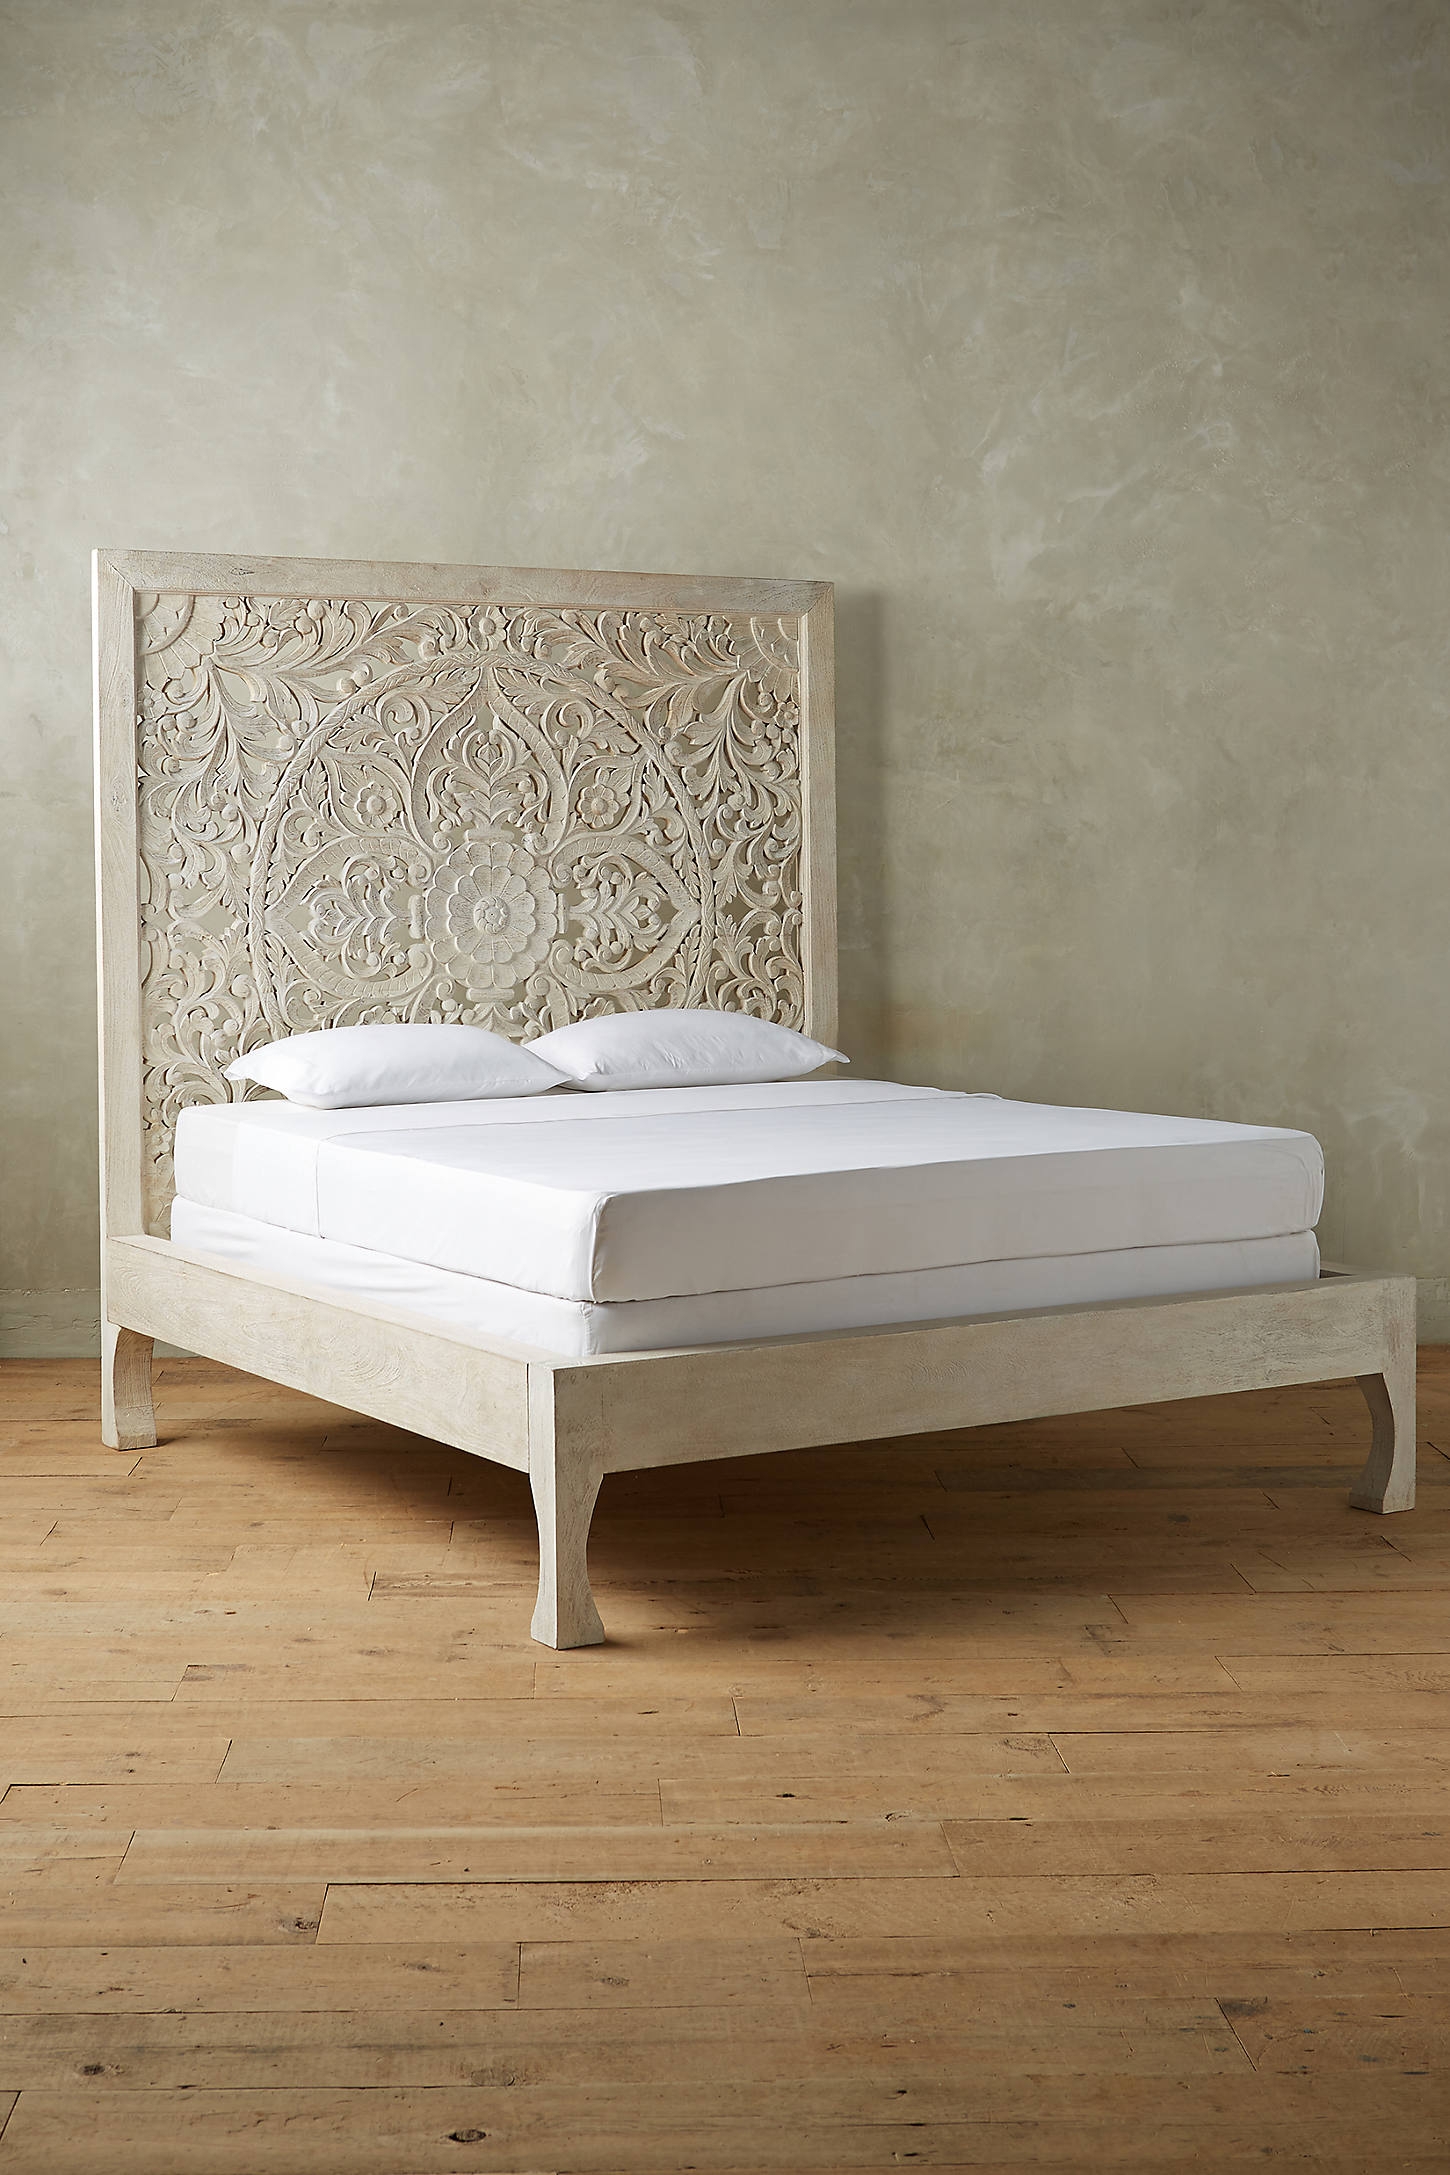 Handcarved Lombok Bed By Anthropologie in White Size KG TOP/BED - Image 0